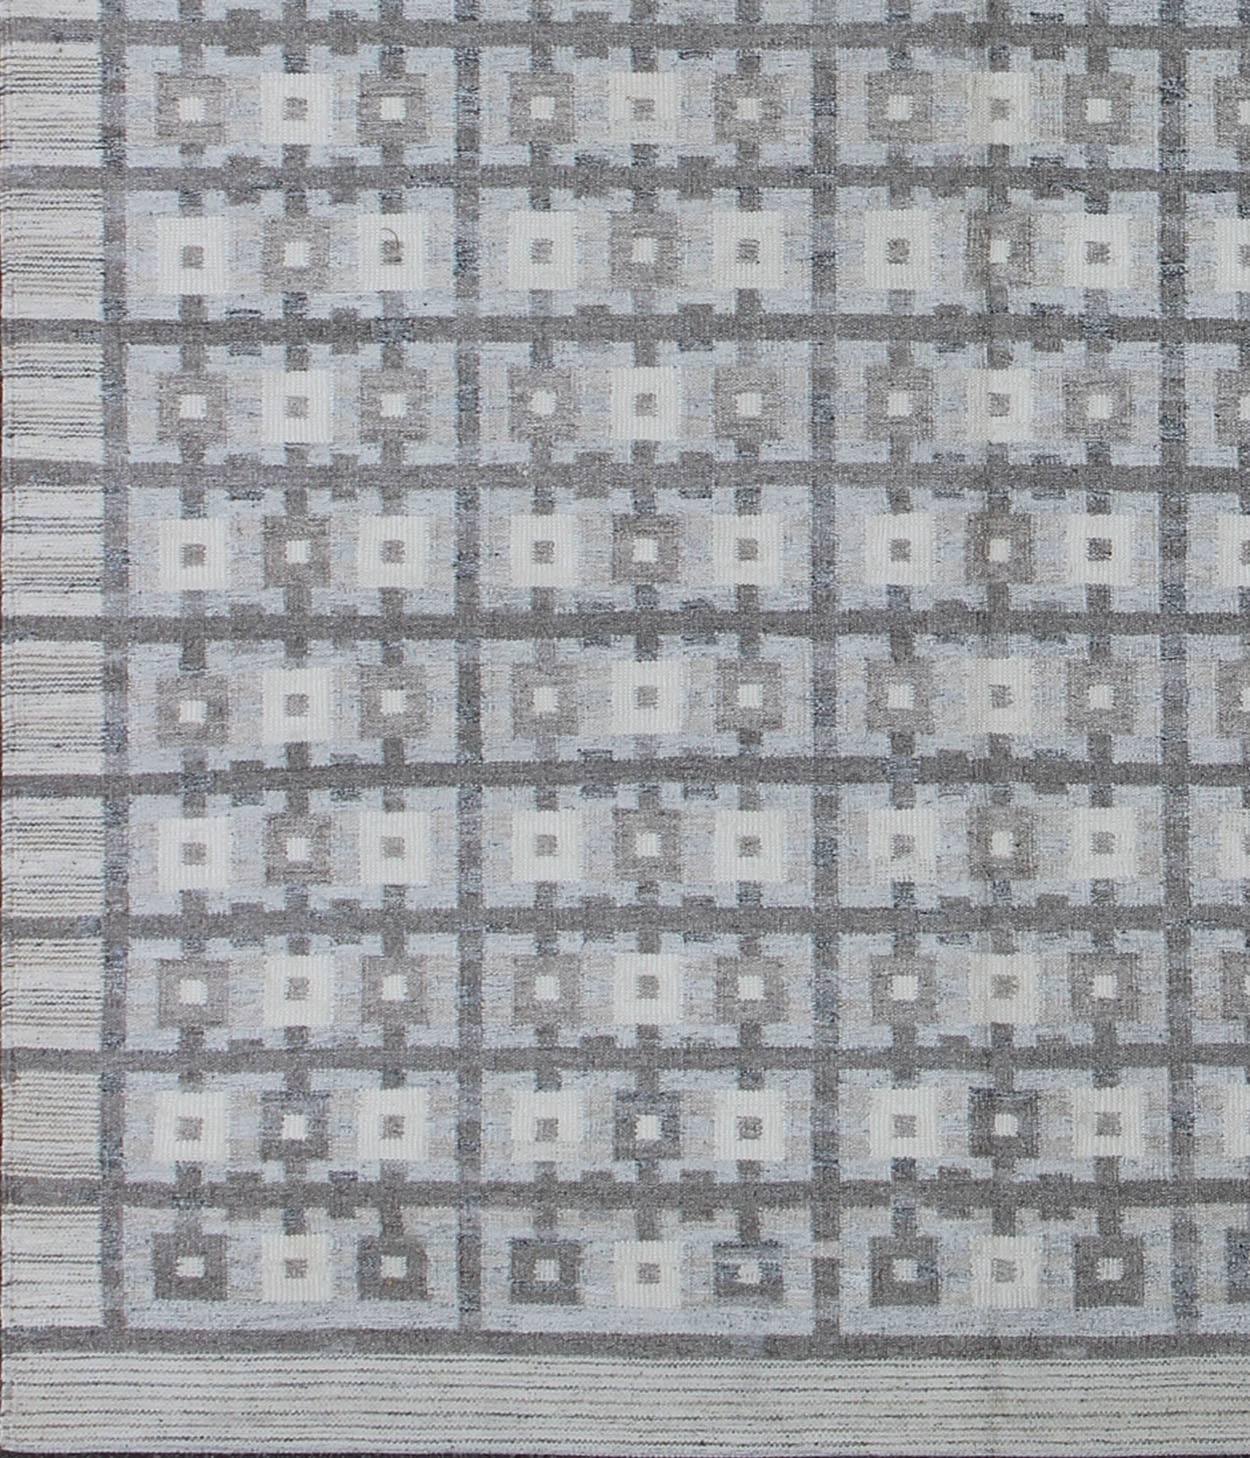 This Scandinavian flat-weave patterned rug is inspired by the work of Swedish textile designers of the early to mid-20th Century. With a unique blend of historical and modern design, this dynamic and exciting composition is beautifully suited for